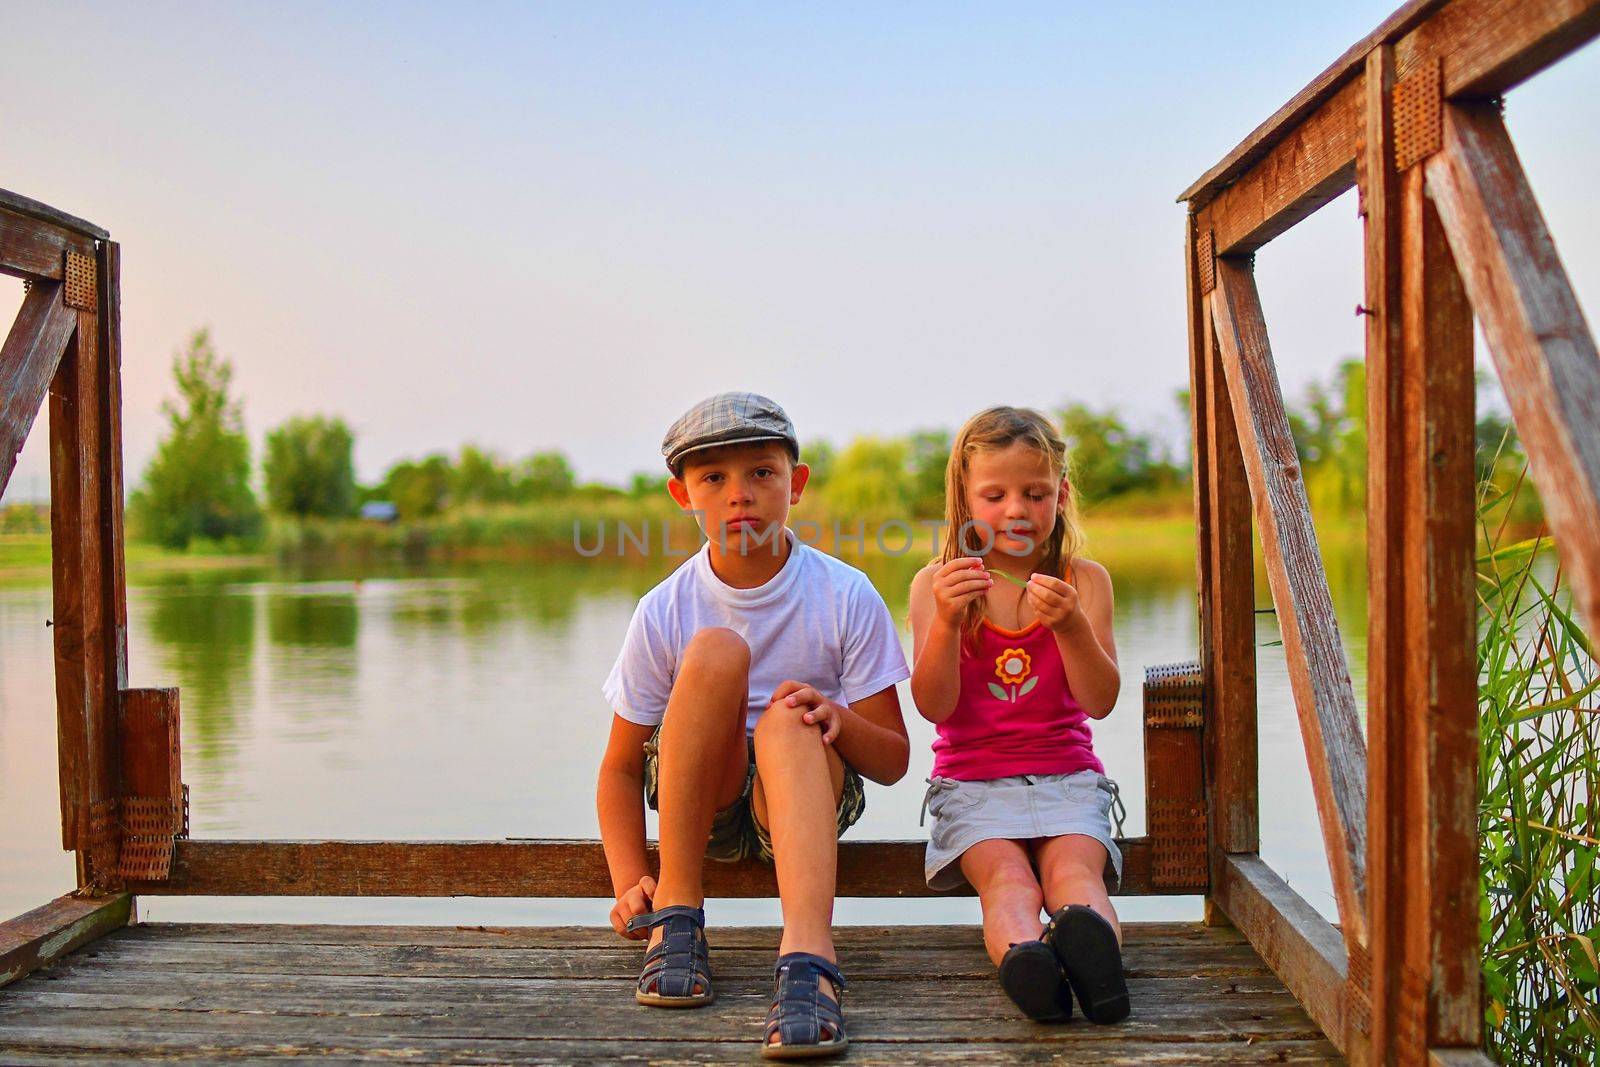 Children sitting on pier. Two children of different age - elementary age boy and preschool girl sitting on a wooden pier. Summer and childhood concept. Children on bench at the lake.